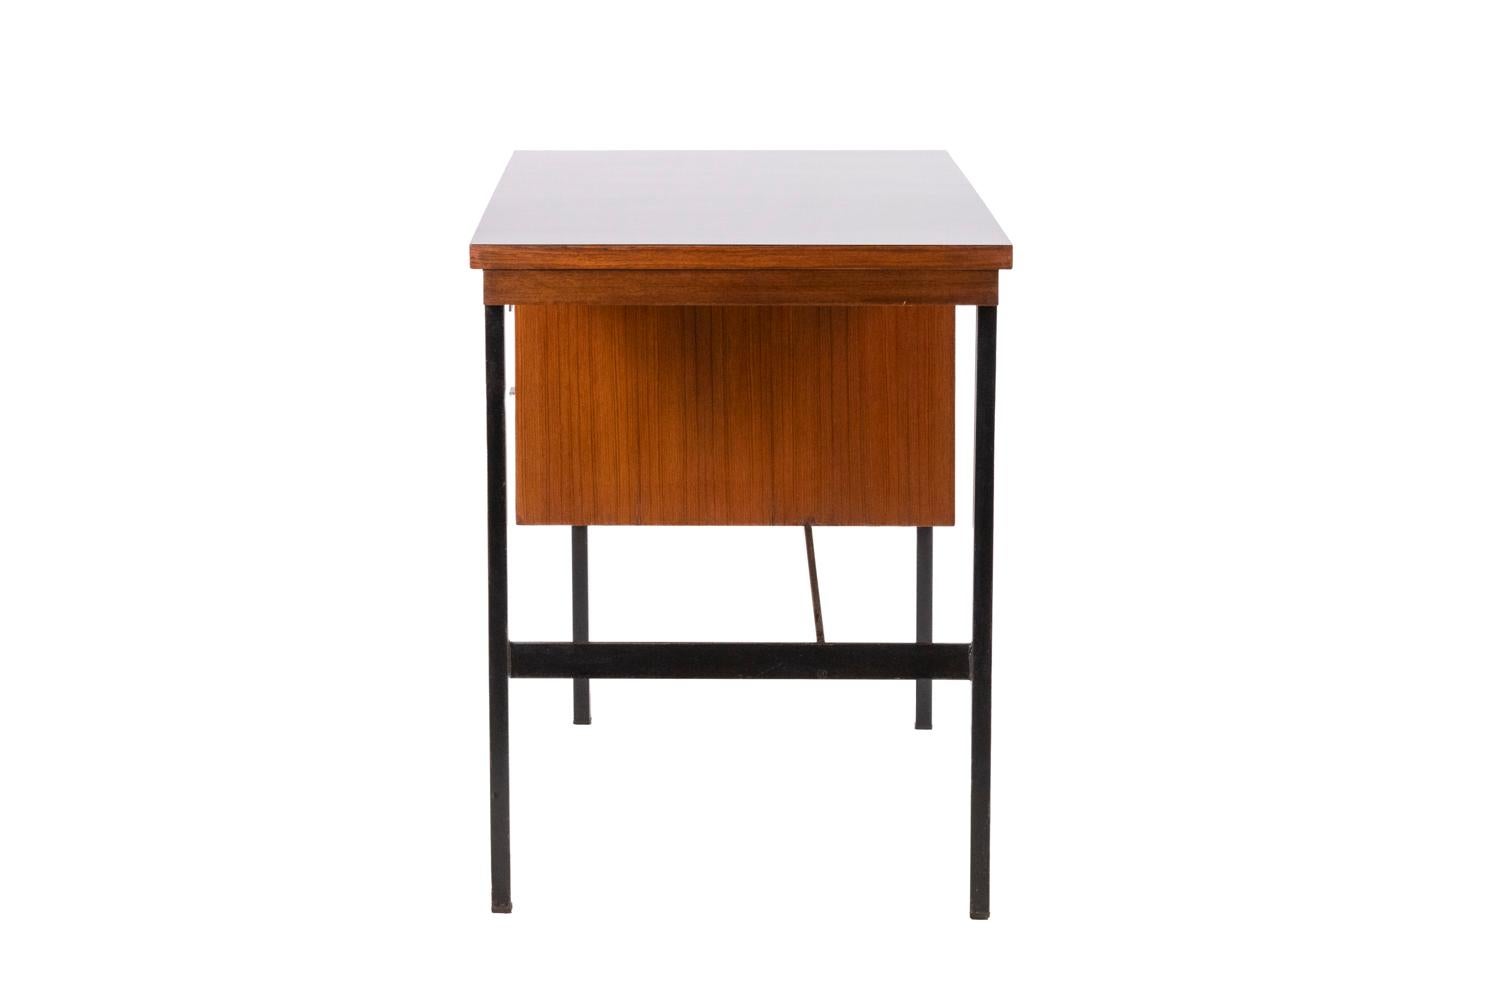 French Jacques Hitier for Multiplex, Desk “Multitaple” in Mahogany, 1950s For Sale